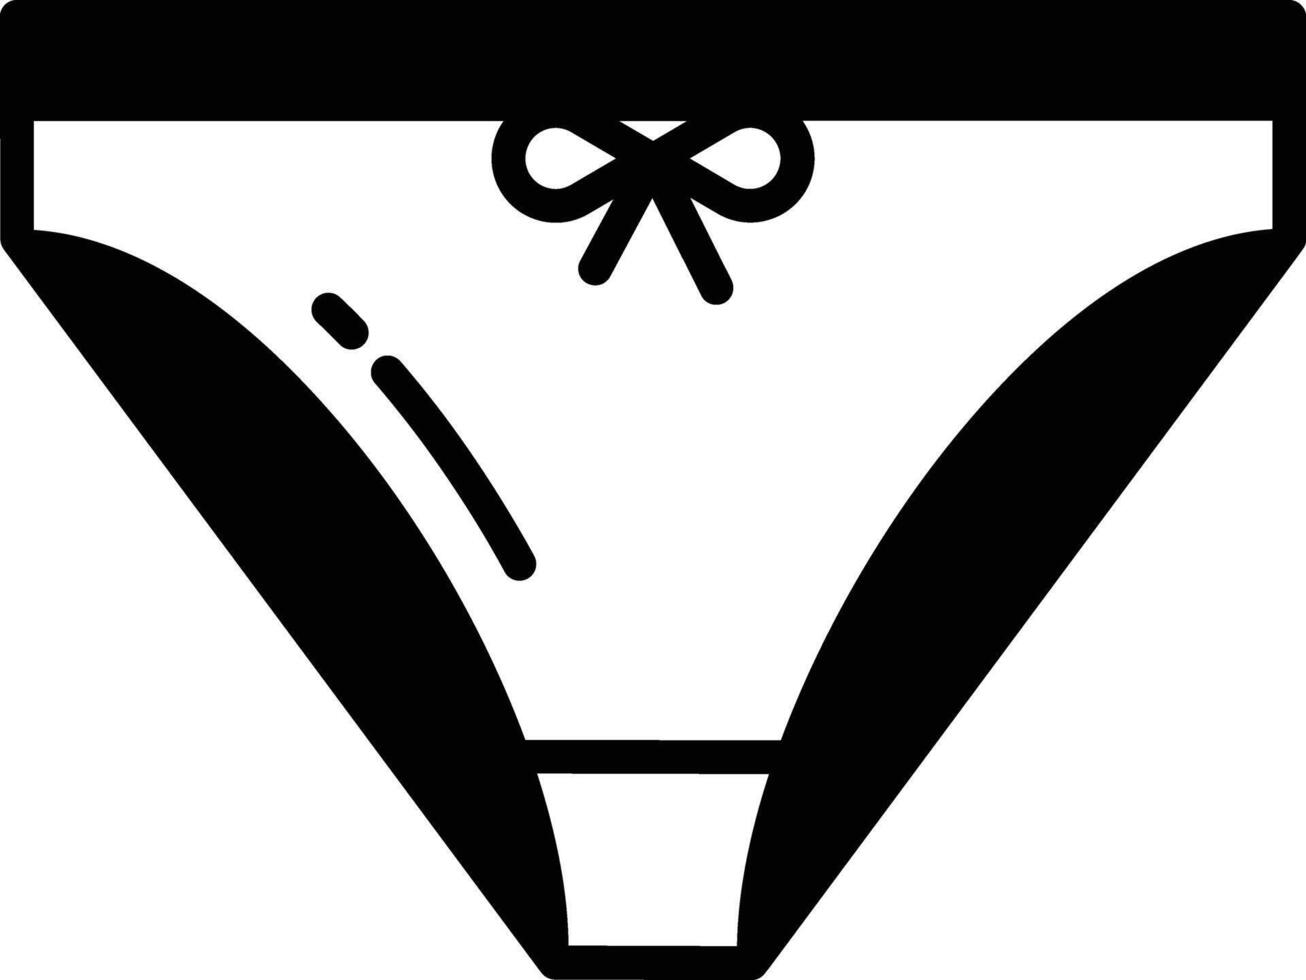 Panties glyph and line vector illustration